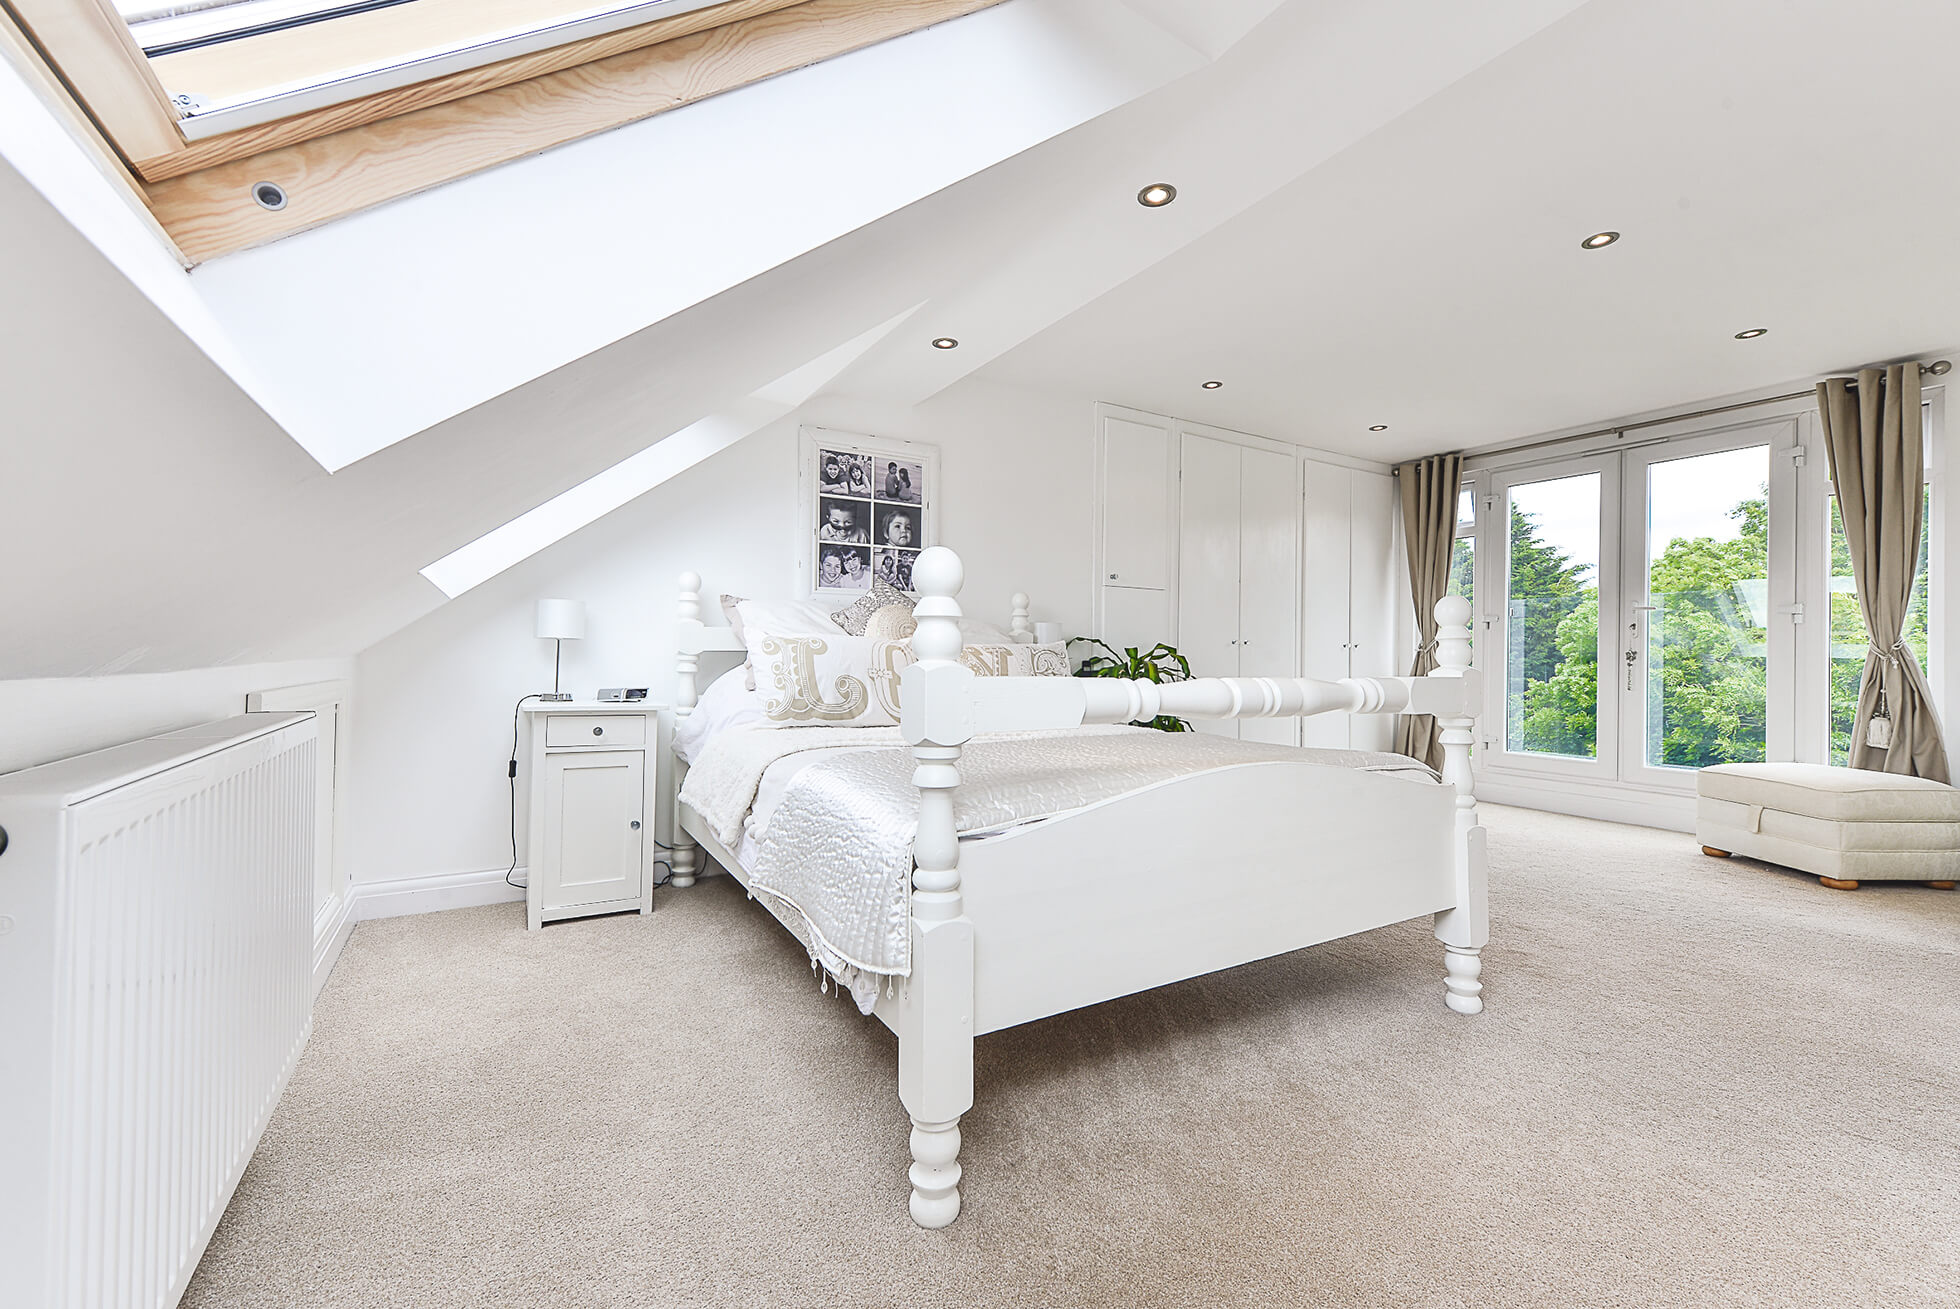 Do you have a question about converting your Loft in Elstree? Here are the most popular questions asked by our clients.